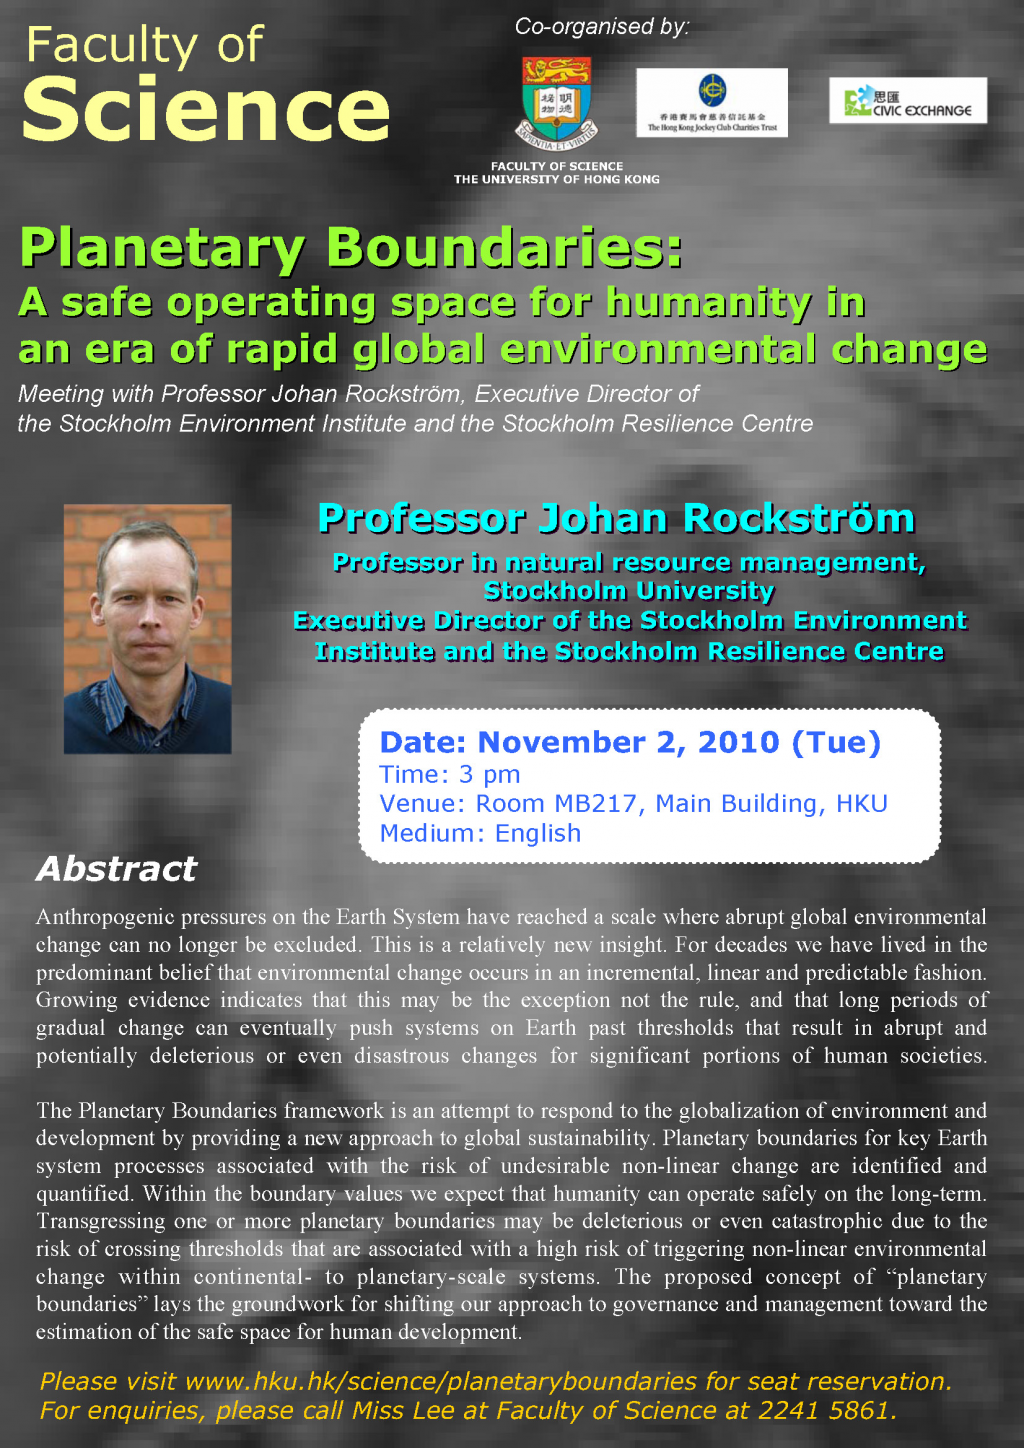 Seminar: Planetary Boundaries: A safe operating space for humanity in an era of rapid global environmental change